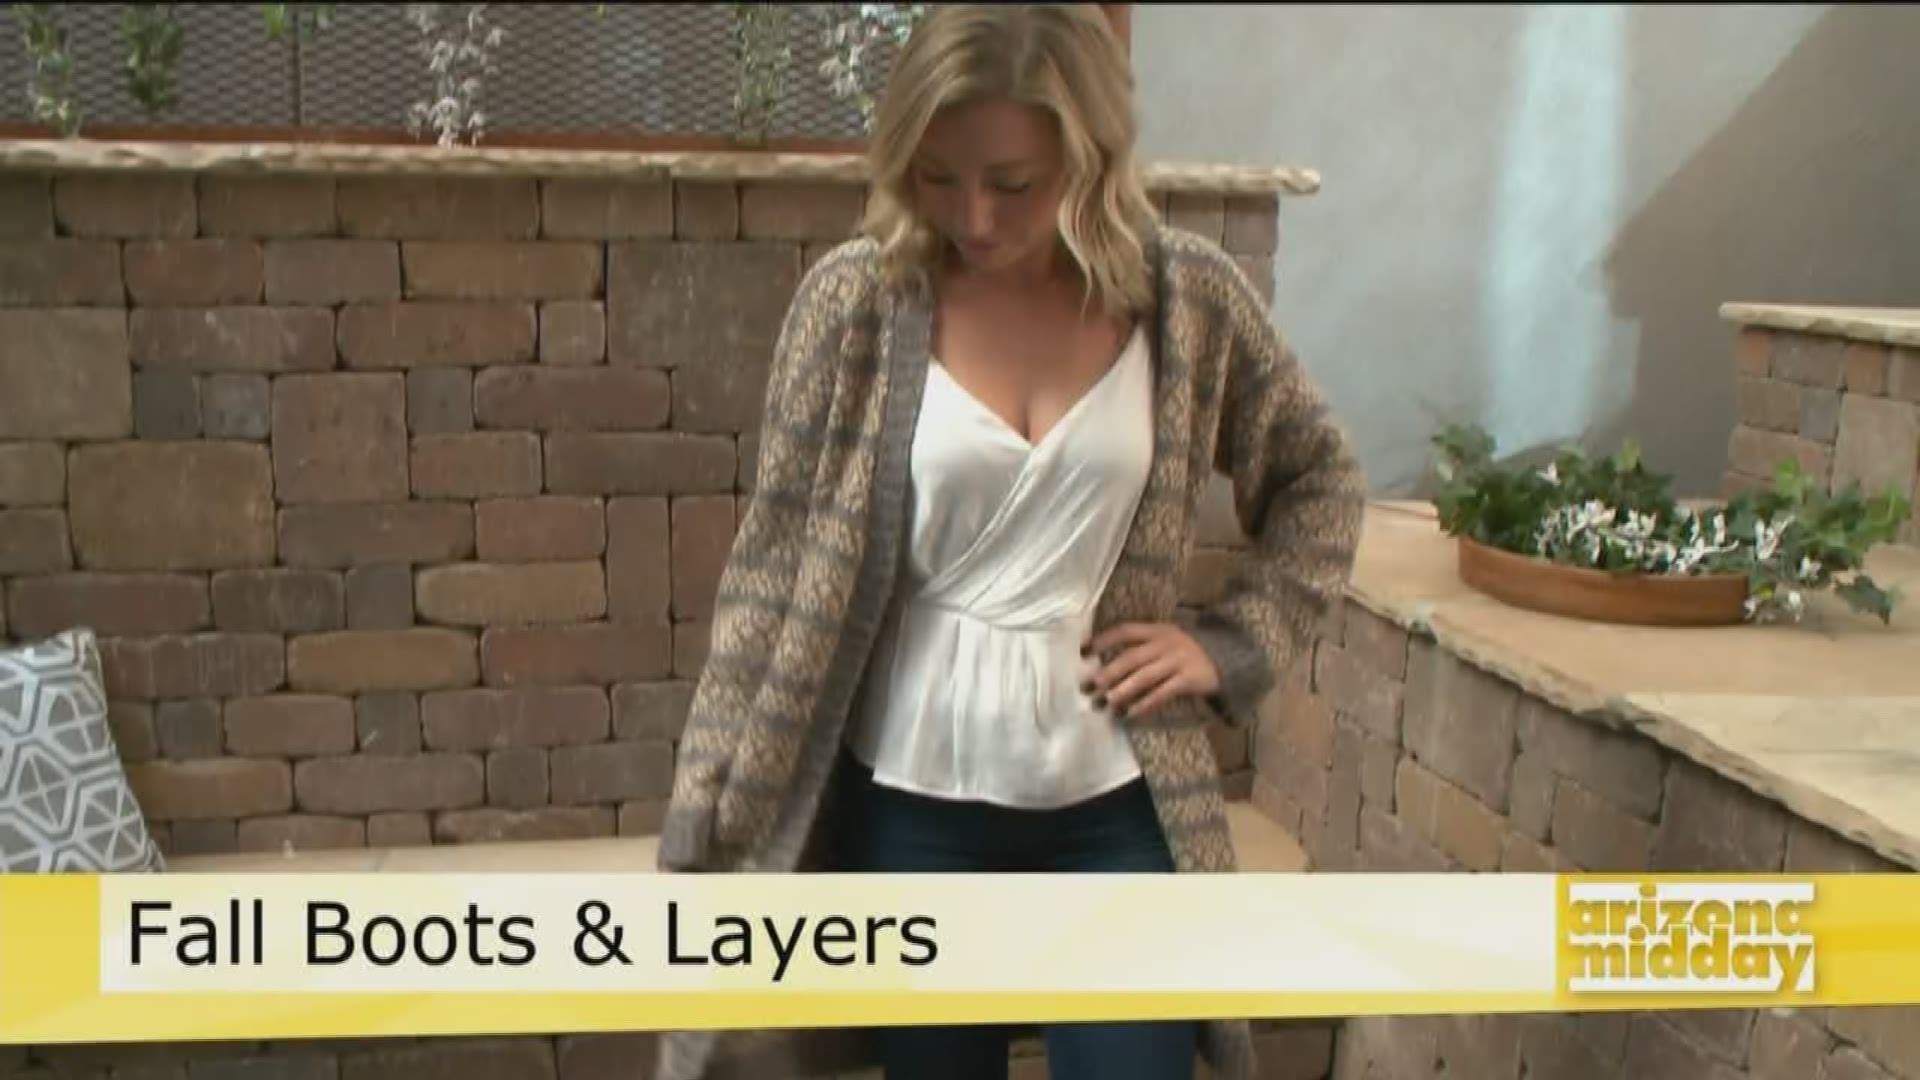 Bridgette McDonald from Roka Boutique shows us how we can layer up fashionable to stay warm plus the cute booties to pair with it